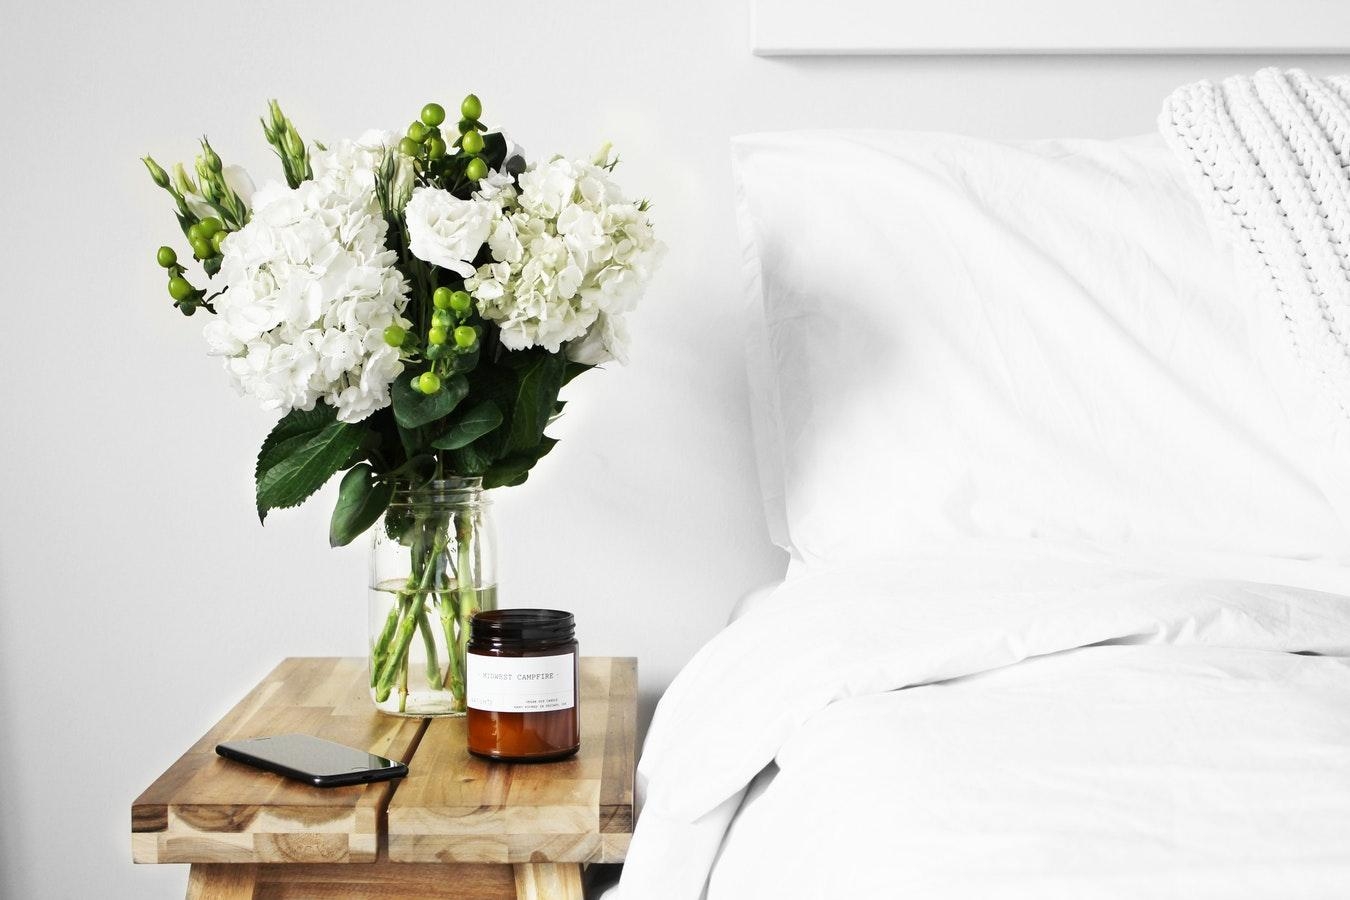 #bed #flowers #goodmorning